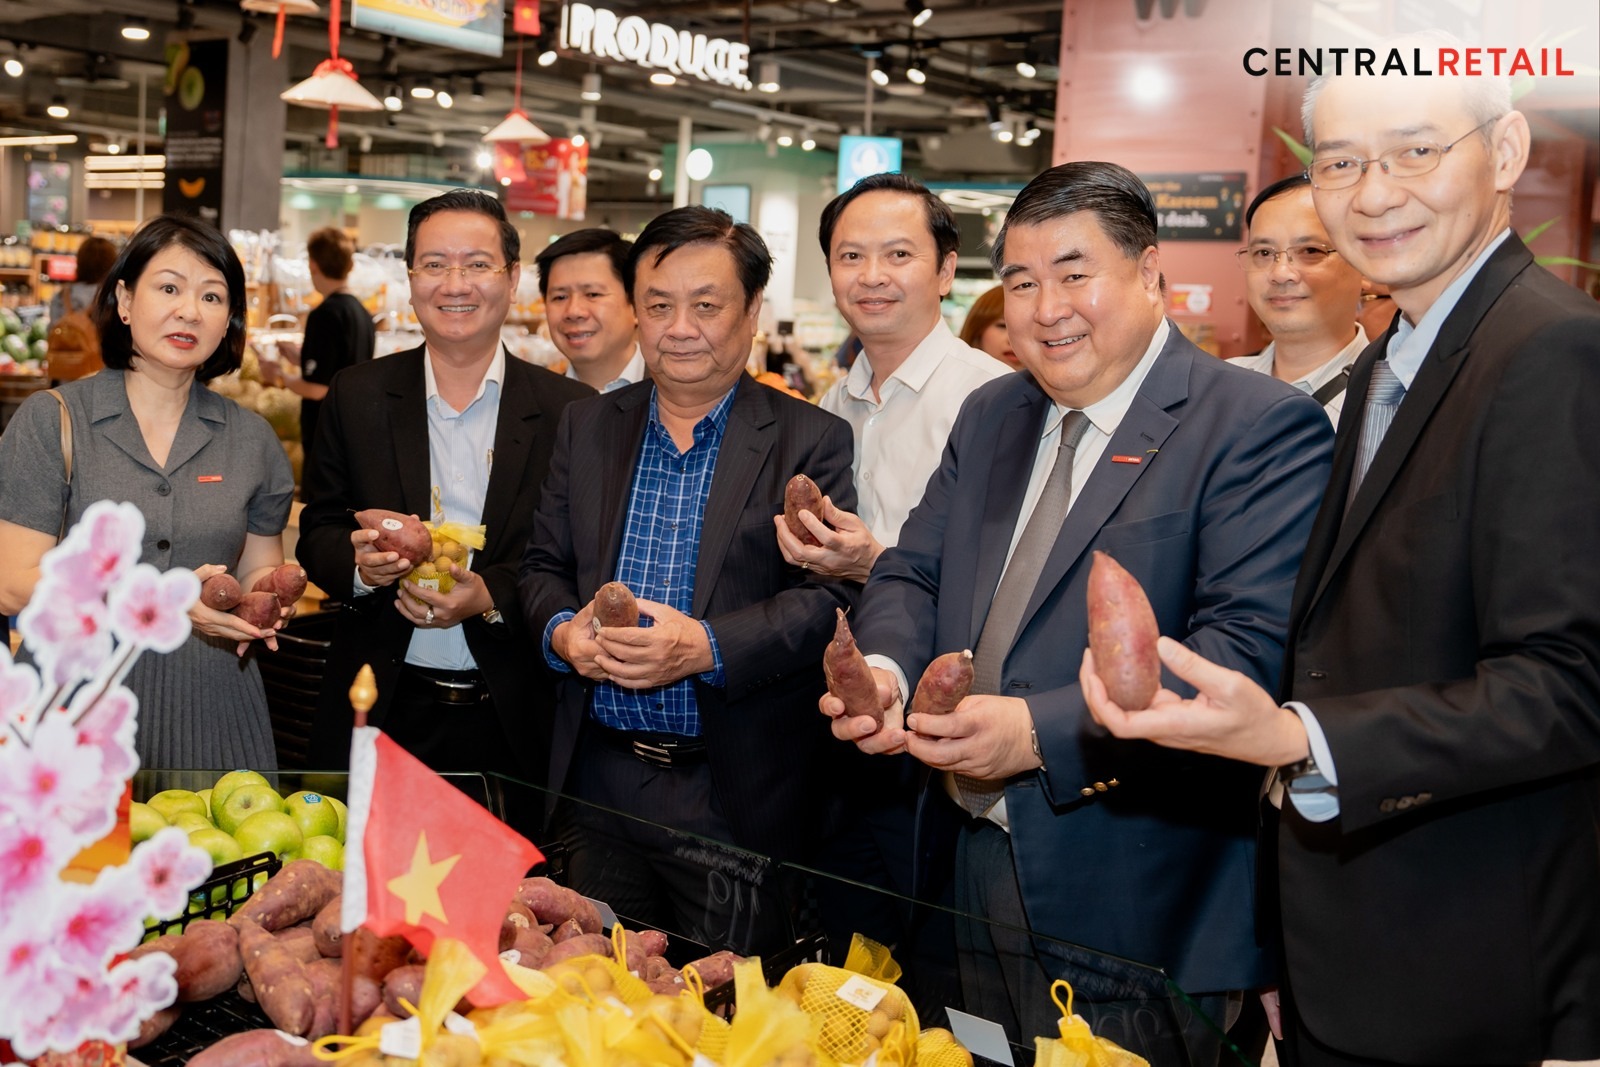 Central Group and Central Retail Vietnam welcomes Miniter Le Minh Hoan and delegation from MARD to visit centralwOrld